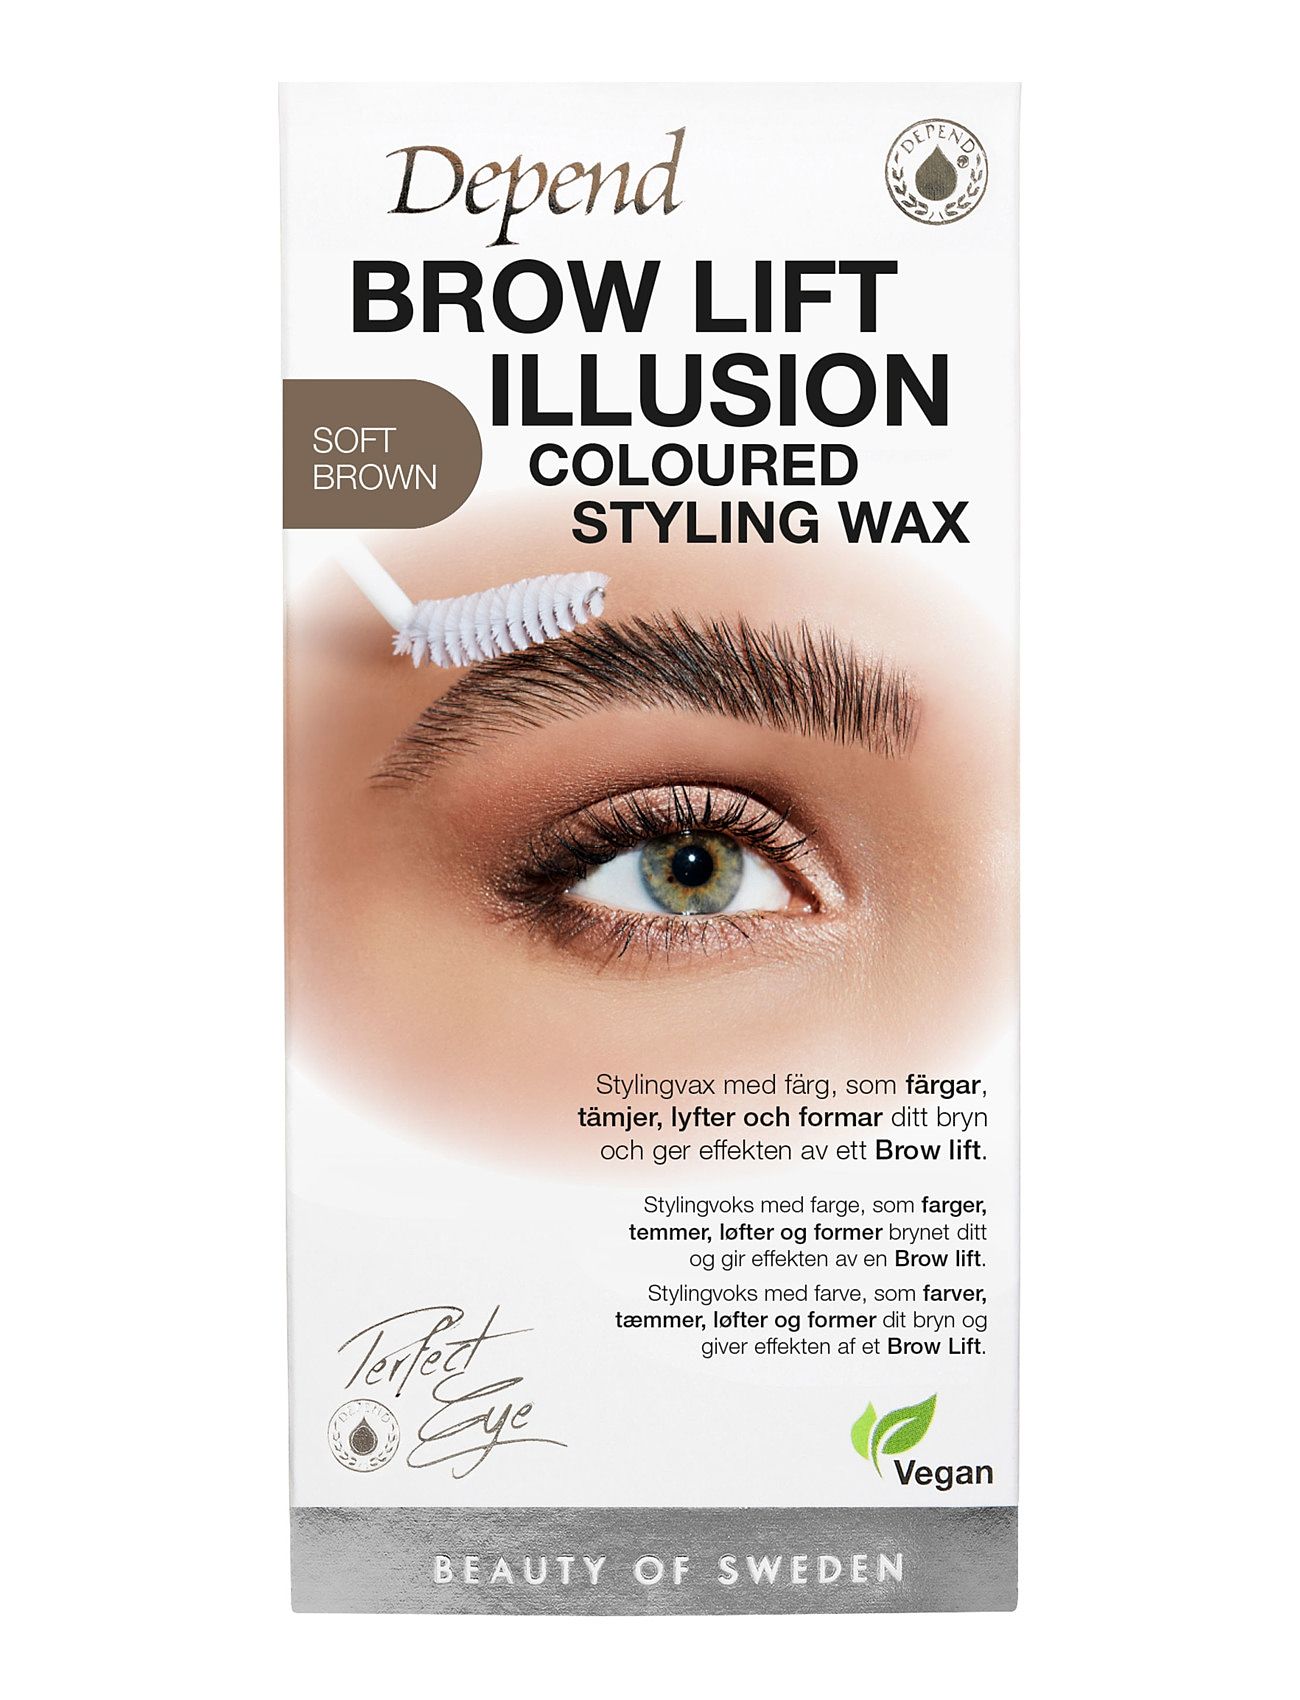 Pe Brow Illusion Wax S.brown Se/No/Dk Beauty Women Makeup Eyes Eyebrows Eyebrow Pomade Nude Depend Cosmetic